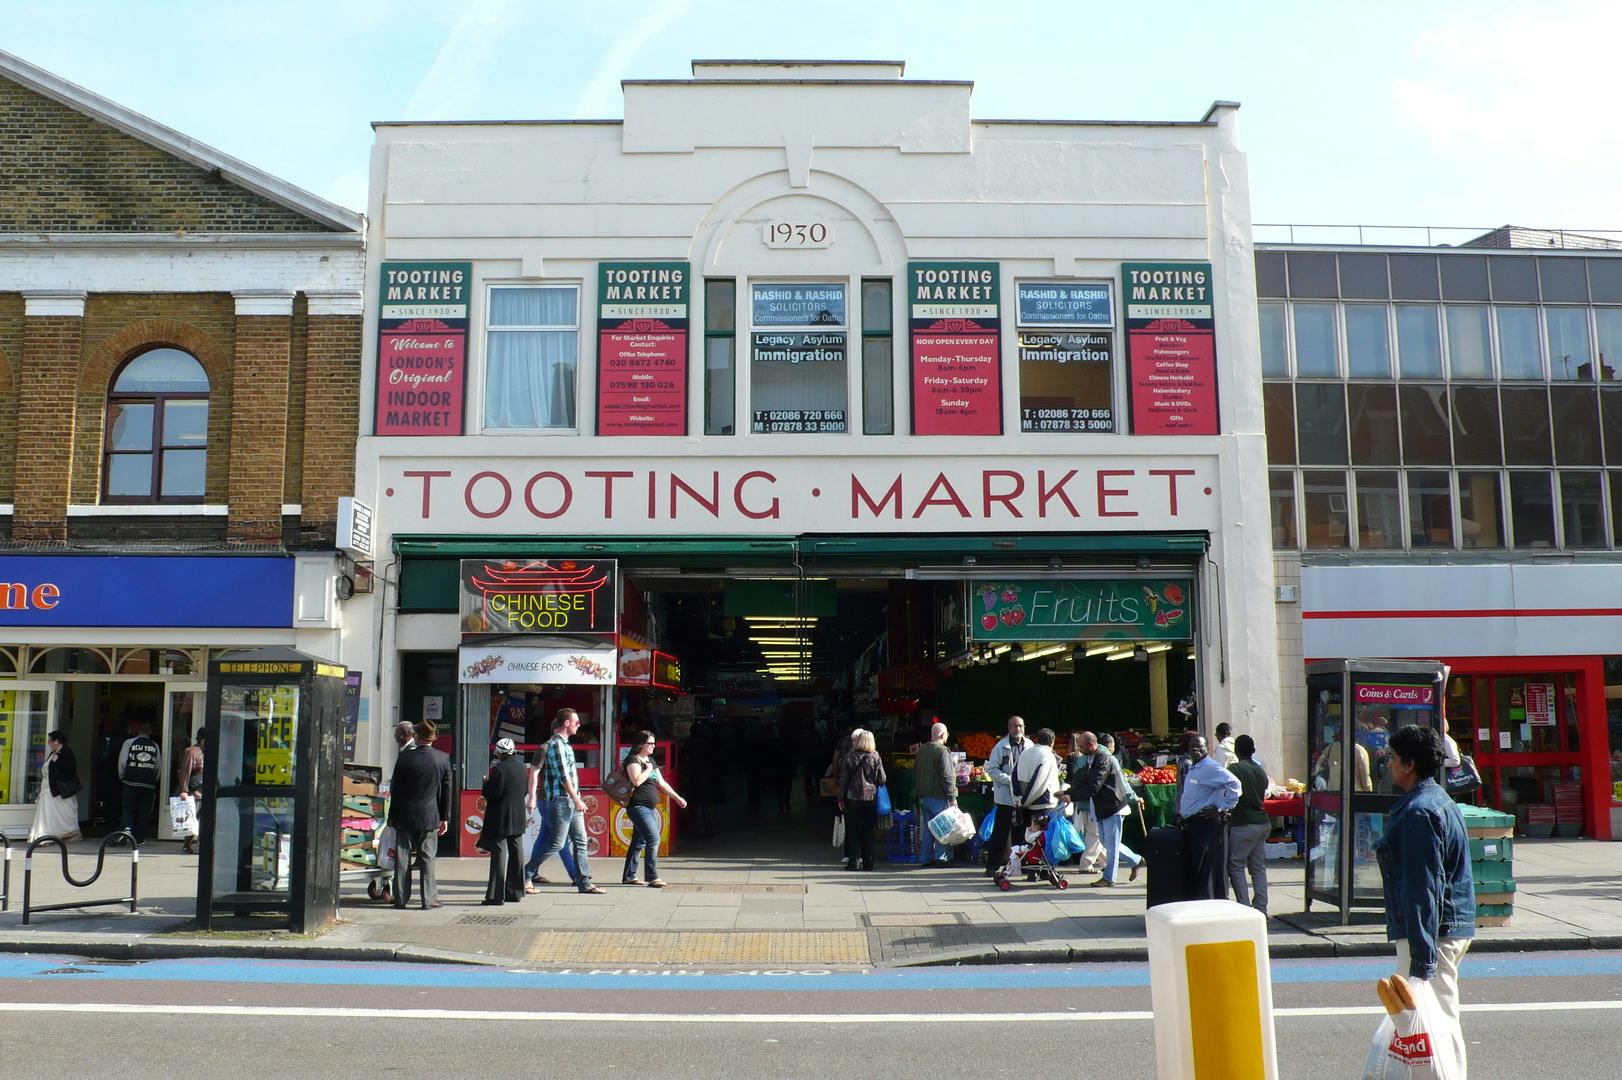 Palms of London, Tooting Market